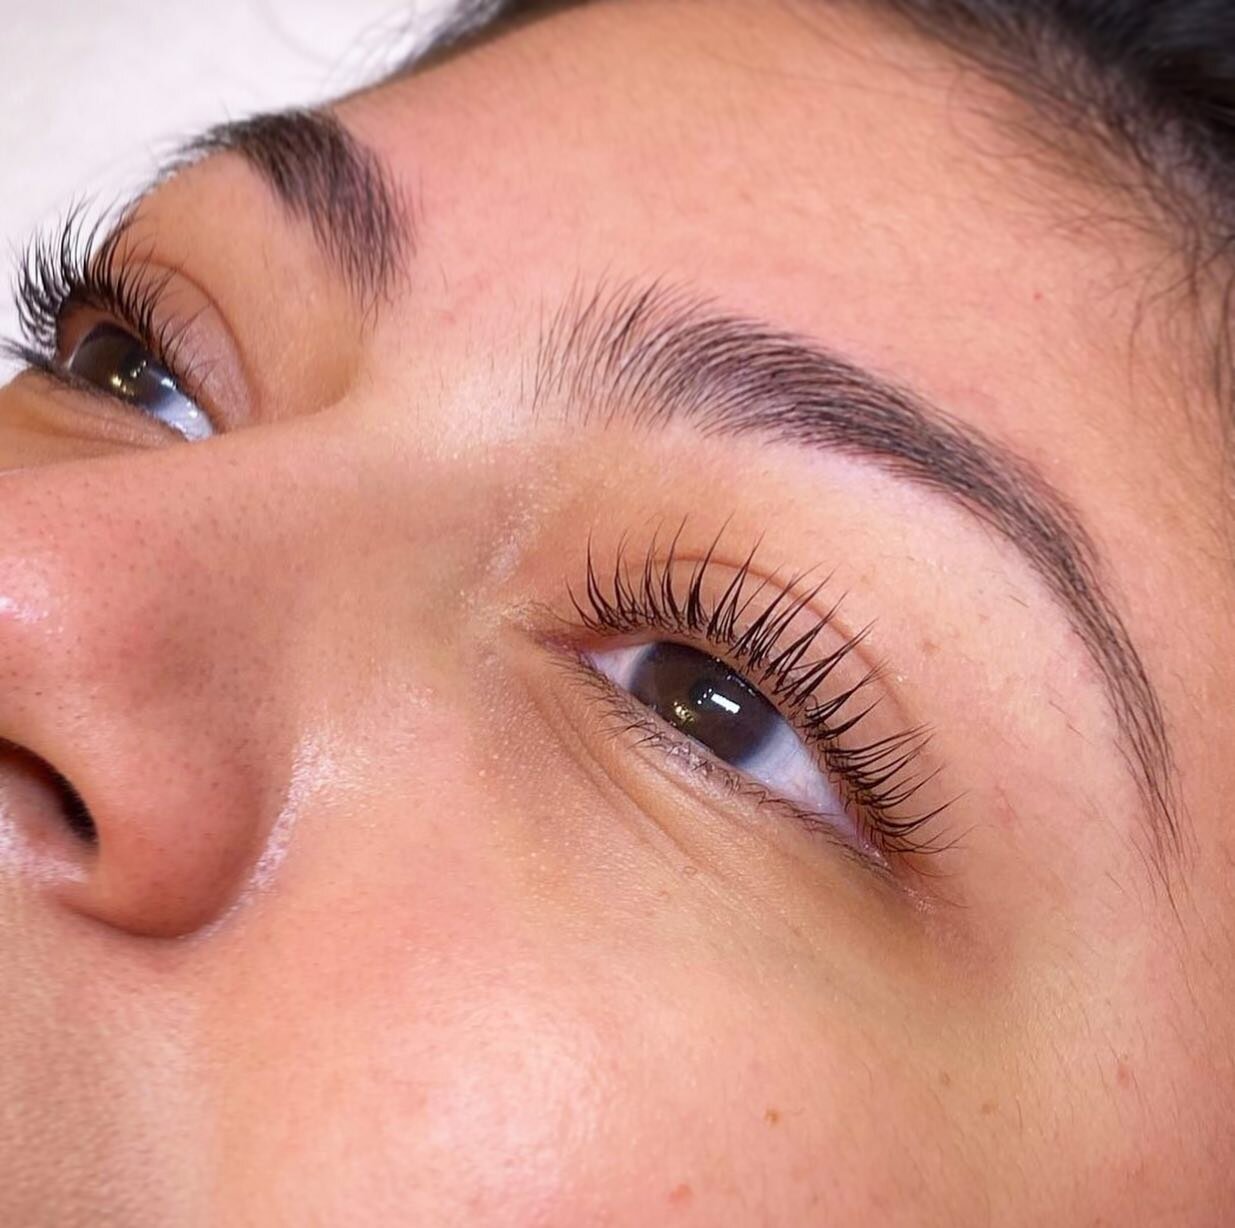 LSH LIFT by the talented @camille.societyoflash 🖤
&bull;
find Cam in our studio in NEW WINDSOR on Mondays from 10-6 and in @societyoflash BEACON Tuesday-Friday!
&bull;
&bull;
&bull;
#lashes #eyelashextensions #lashextensions #besol #societyoflash #e